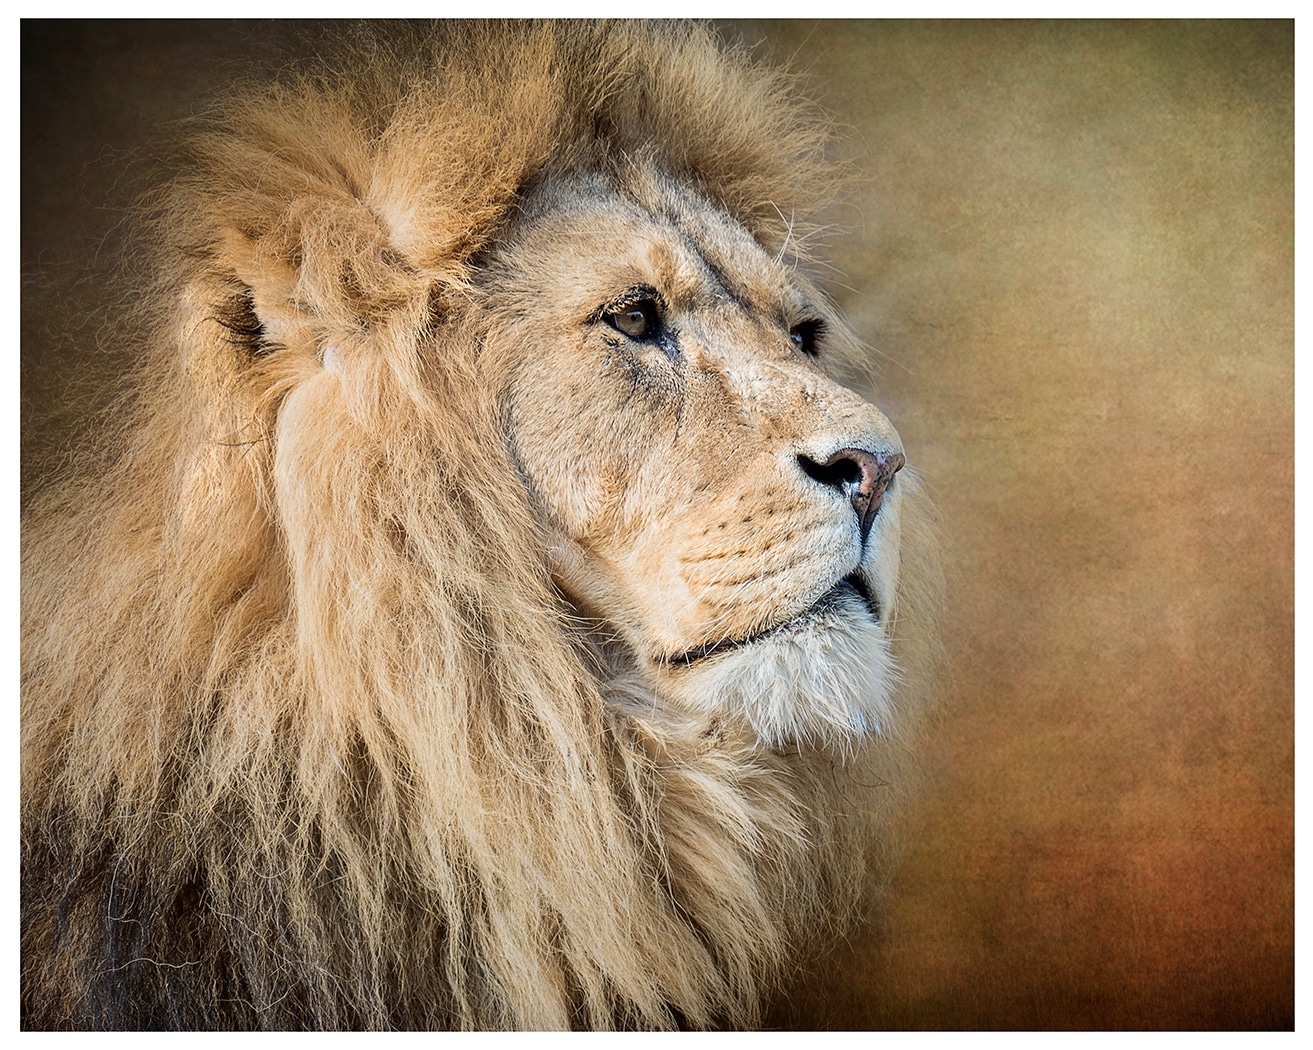 Portraight of a lion which won 1st place in the competition